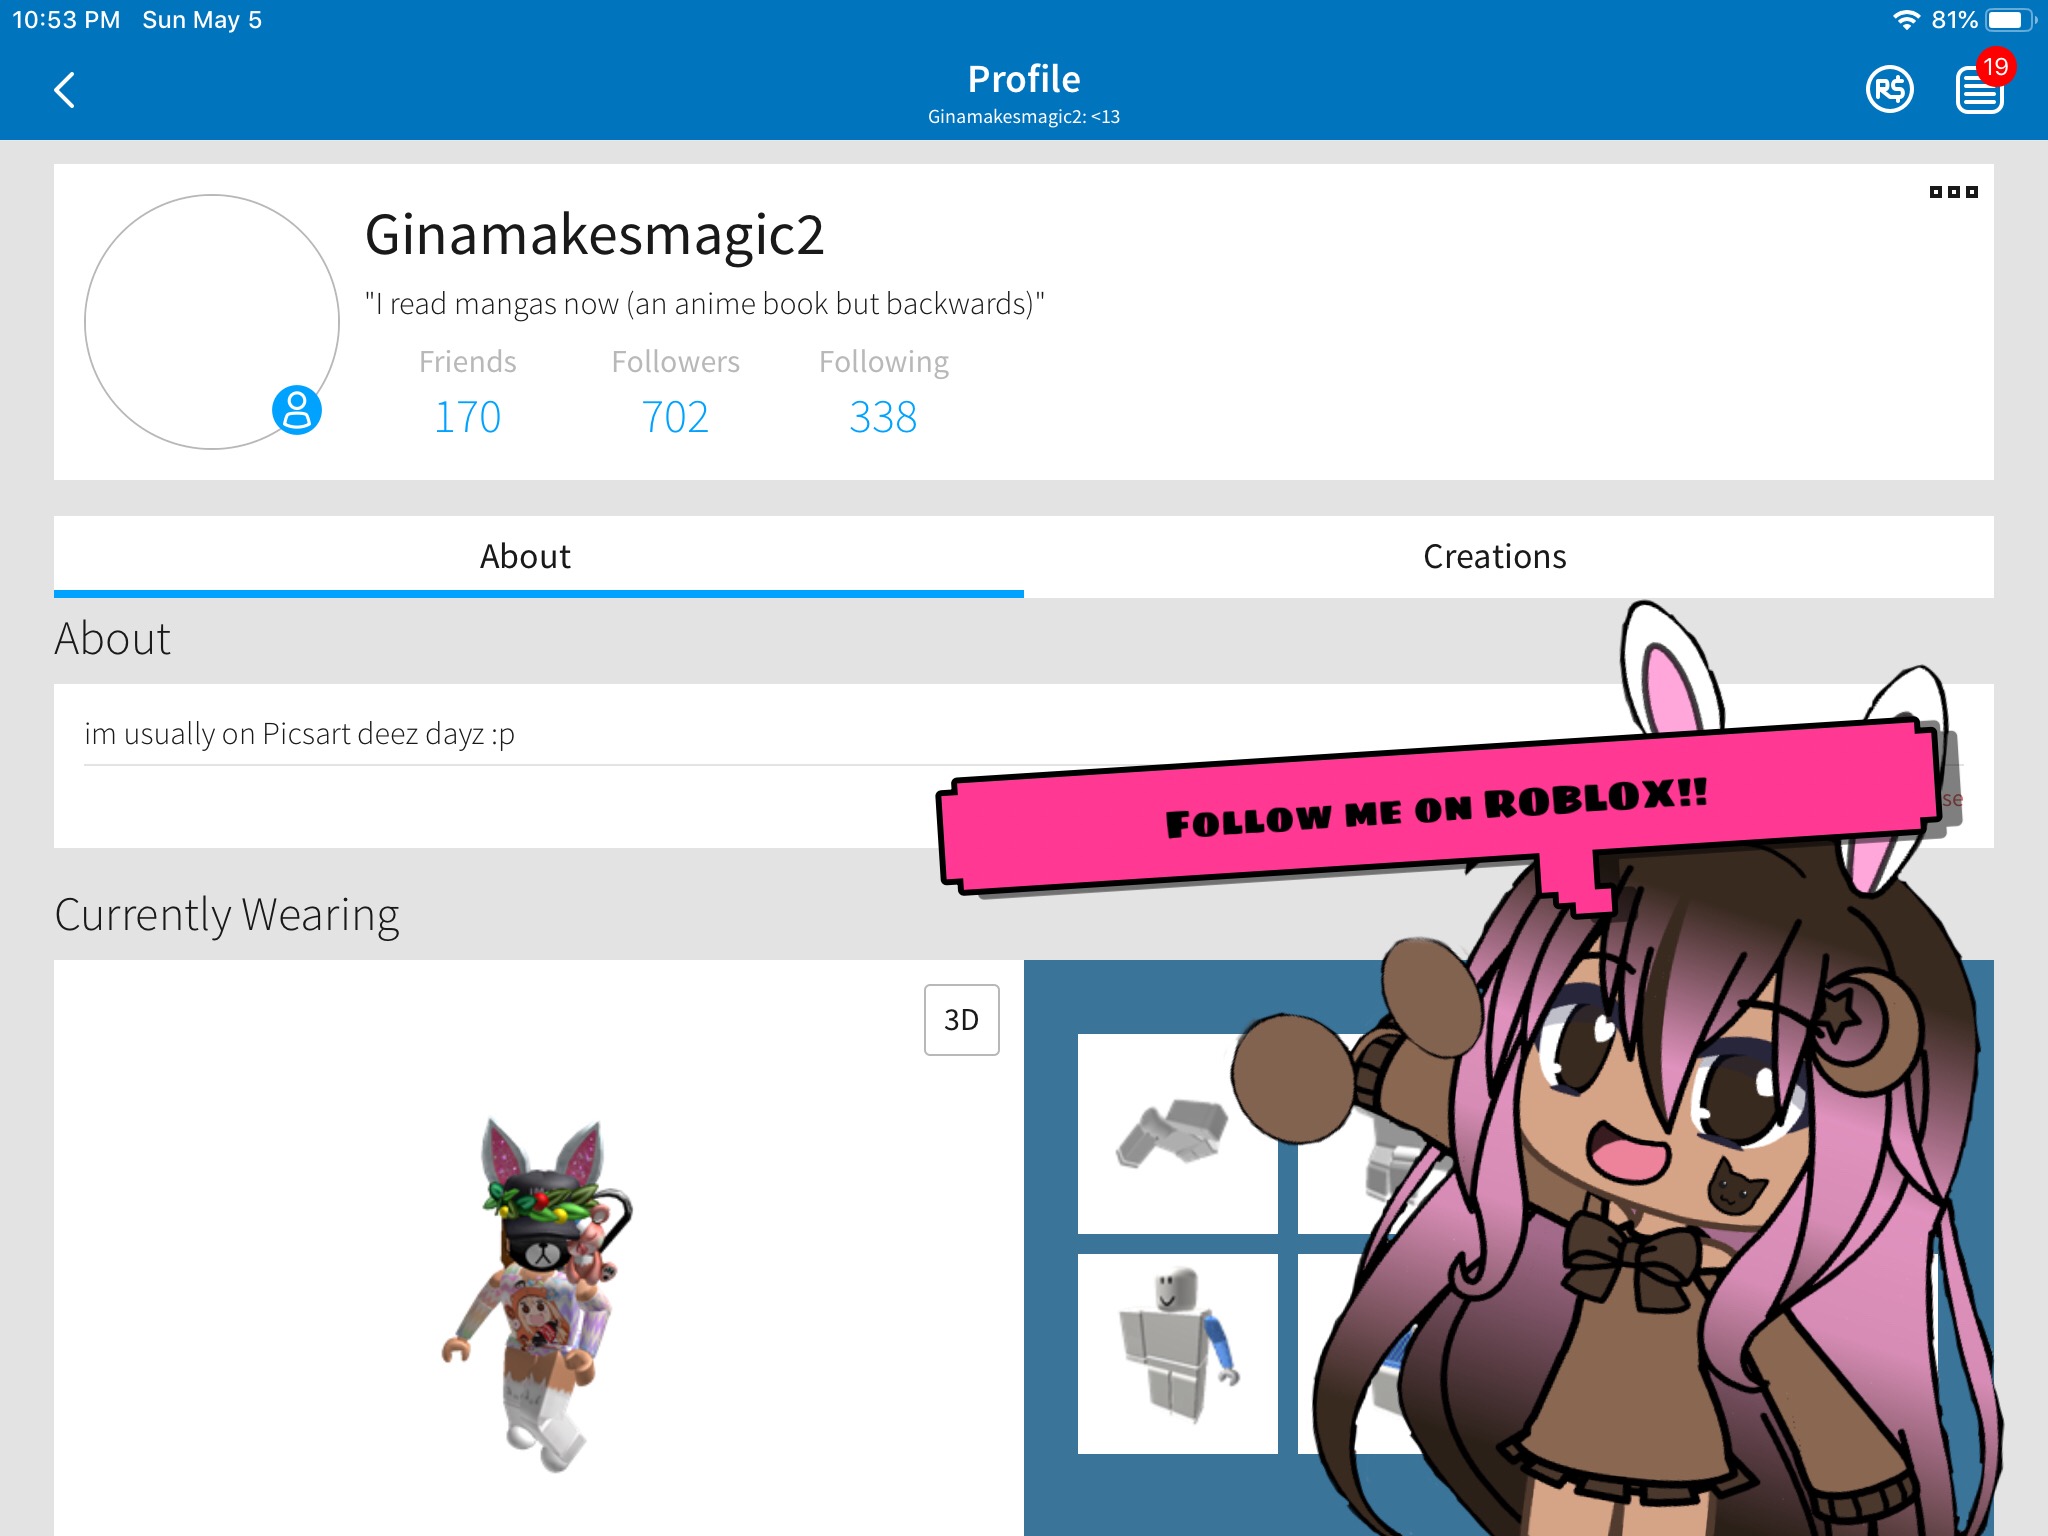 rroblox posted by unatsu dragneelfan12 14m i need to get access to rb world 3 someone plz donate robux general help plz my user is draconiczone xd message me if u actually